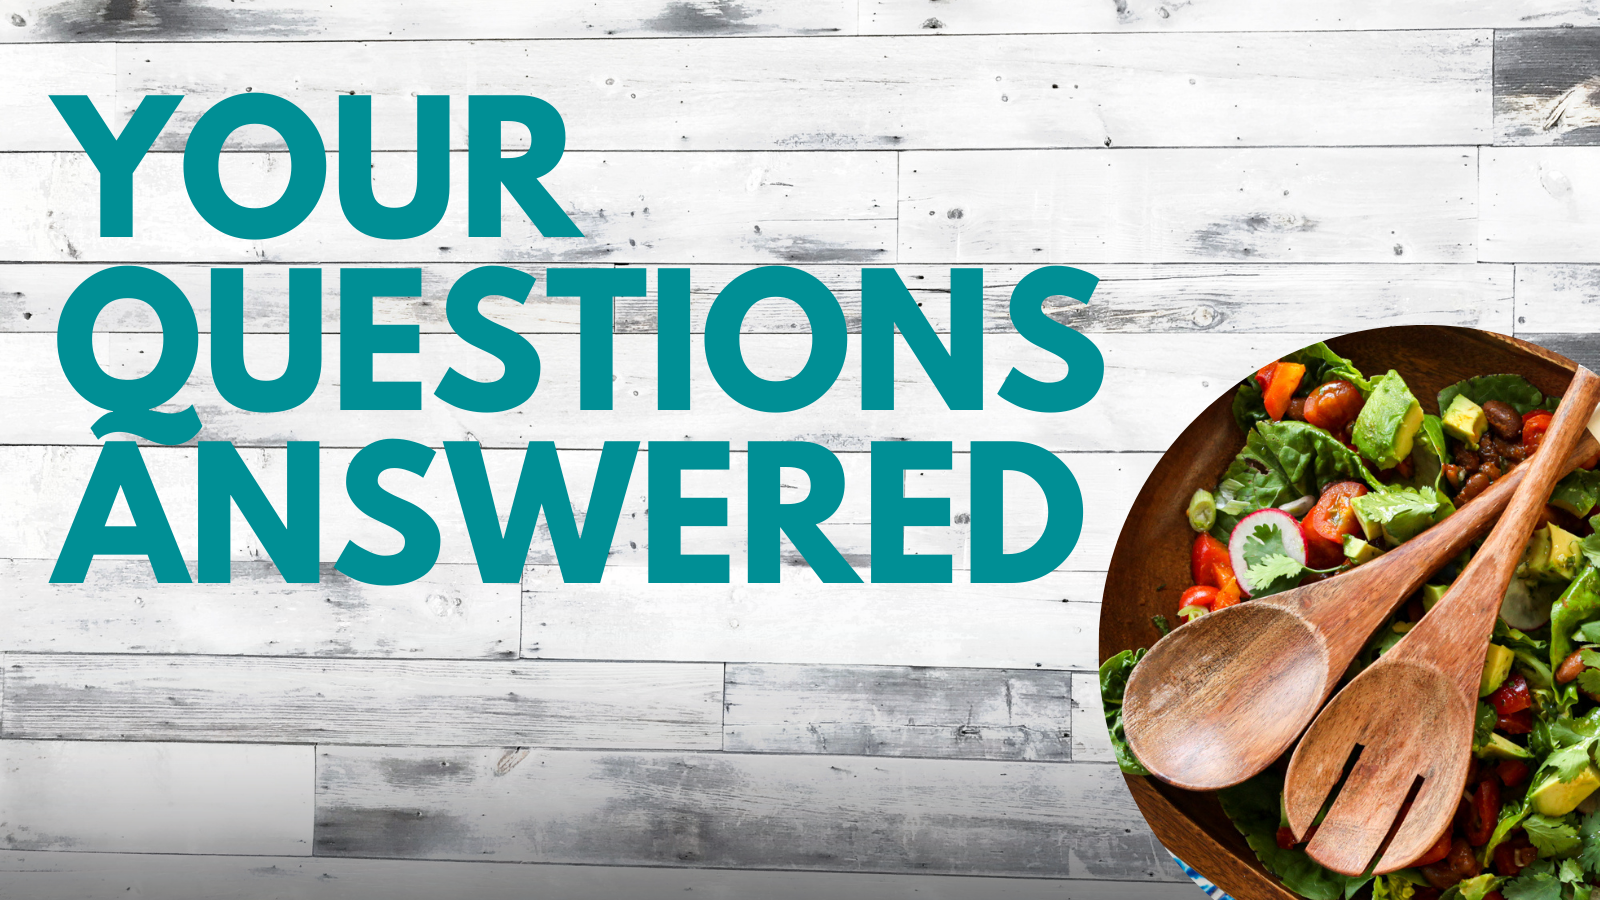 Ask Lisa - Your burning questions answered!